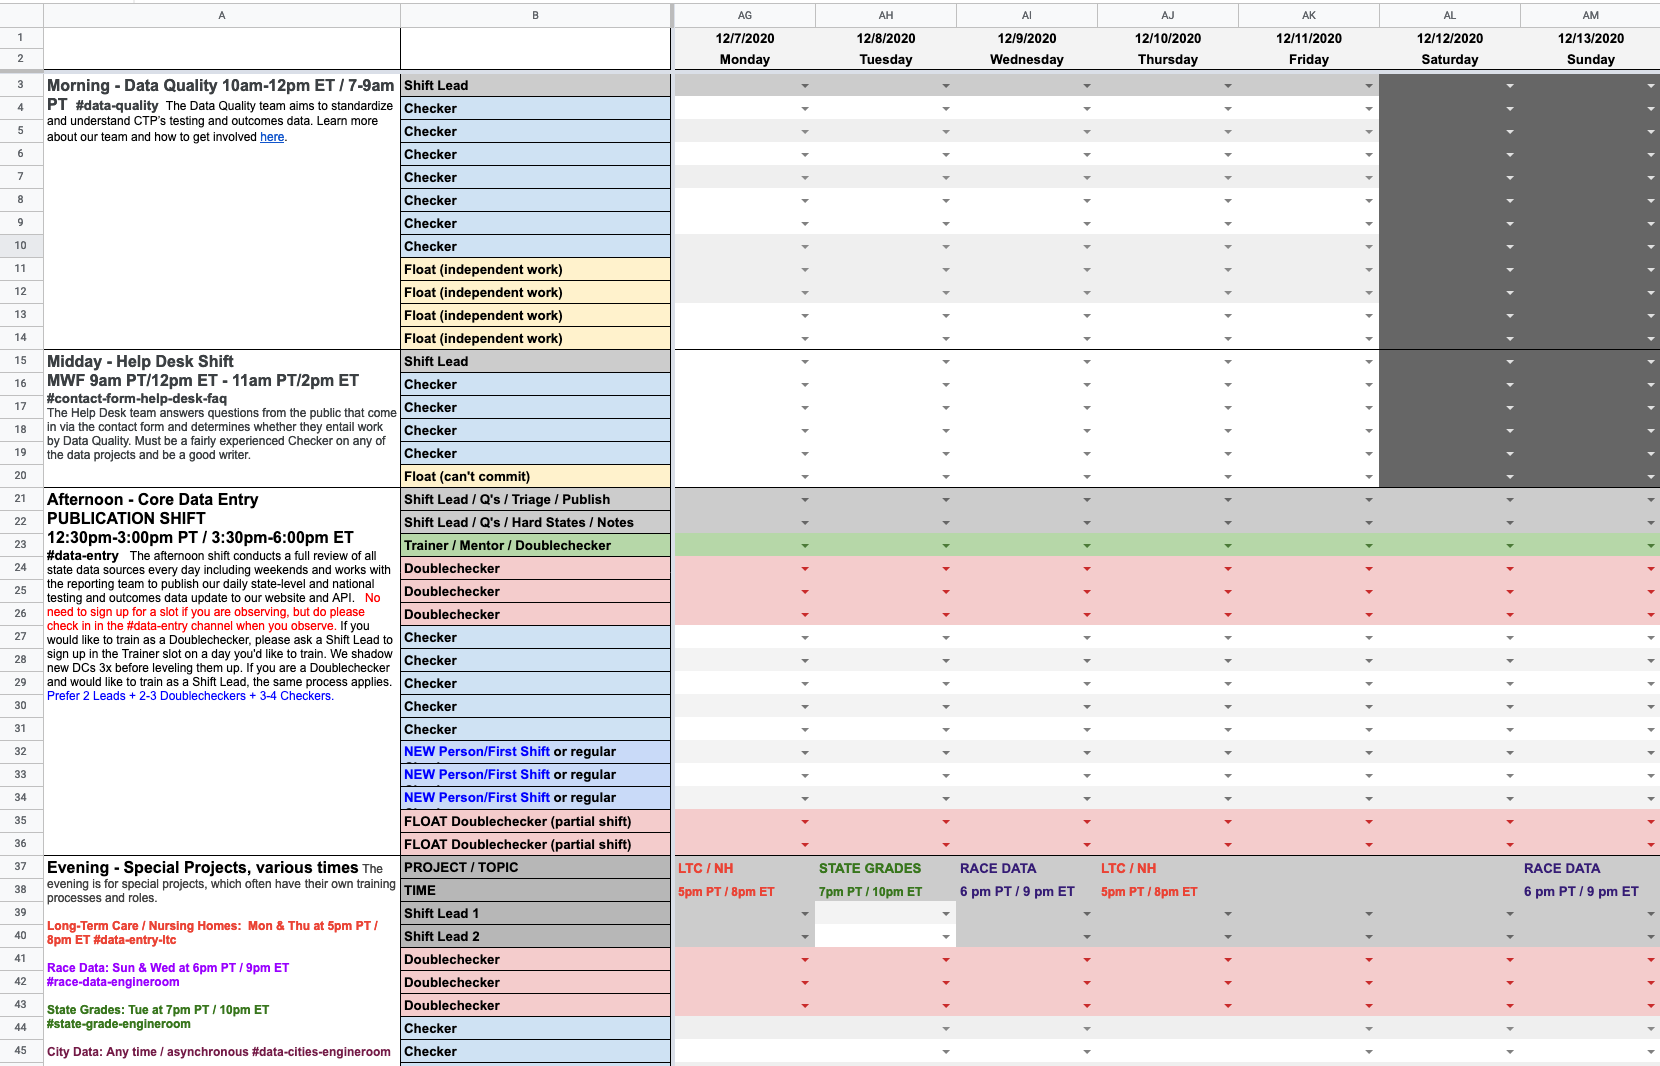 Screenshot of color-coded spreadsheet grid used as a sign-up sheet. Shown are seven days in December 2020, Monday through Sunday. All cells are empty of names but have arrows indicating that they will turn into a dropdown when clicked on. The leftmost column lists a morning Data Quality shift, a Midday Help Desk shift, an Afternoon Data Entry Publication Shift, and Evening Special Project shifts. The second column from the left lists various color-coded roles. Each shift is associated with several rows allowing several people to sign up for each shift.